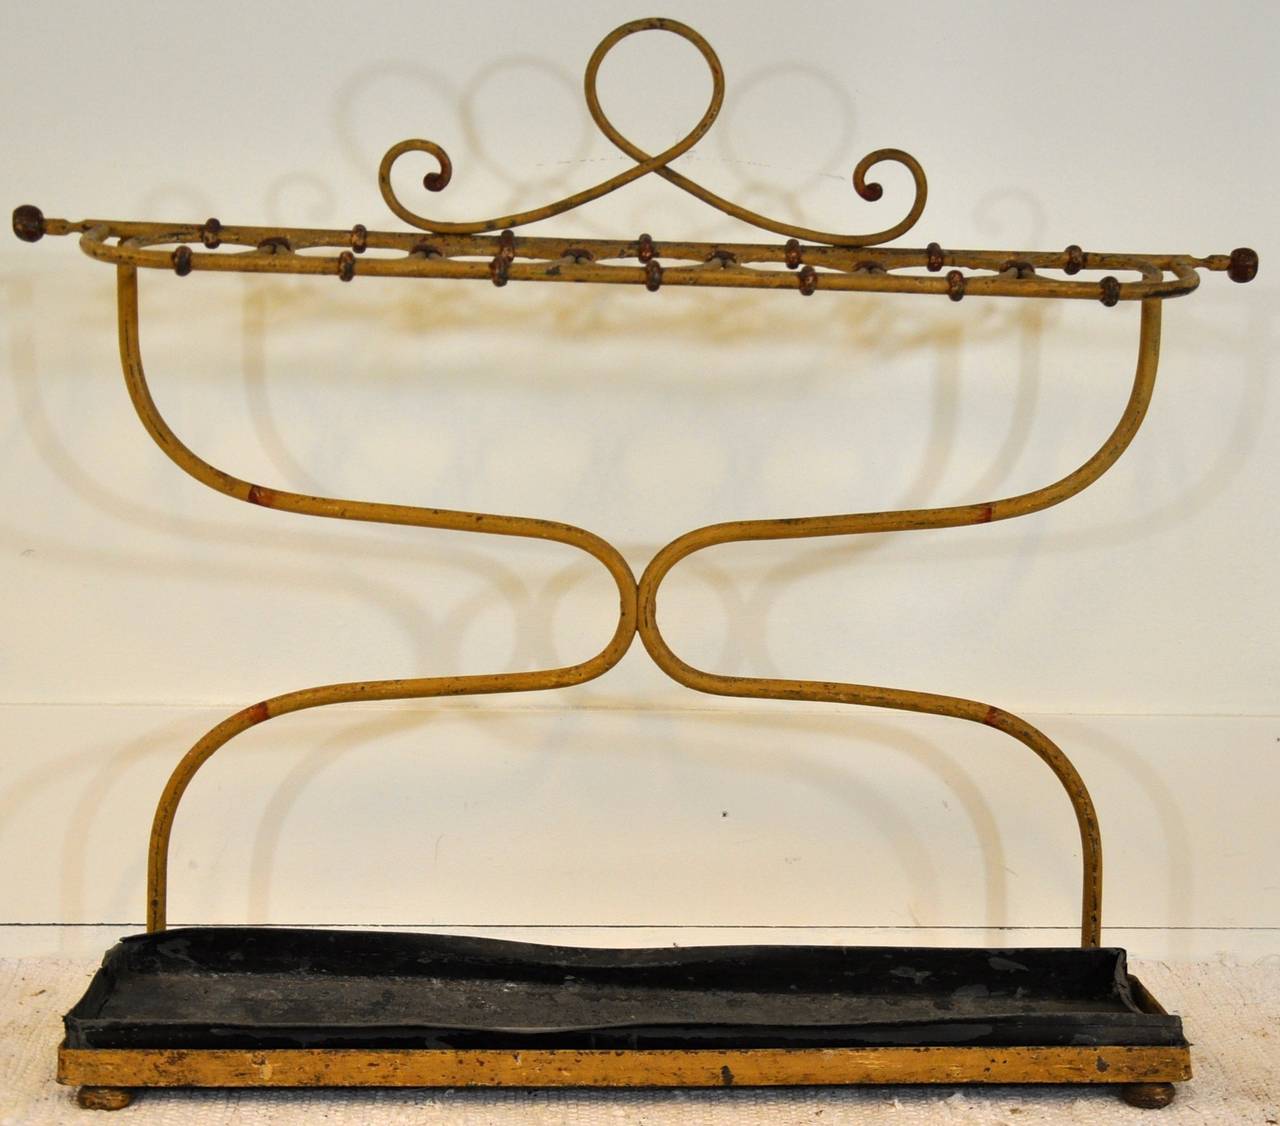 A French 19th century umbrella stand painted in a ocher yellow color.